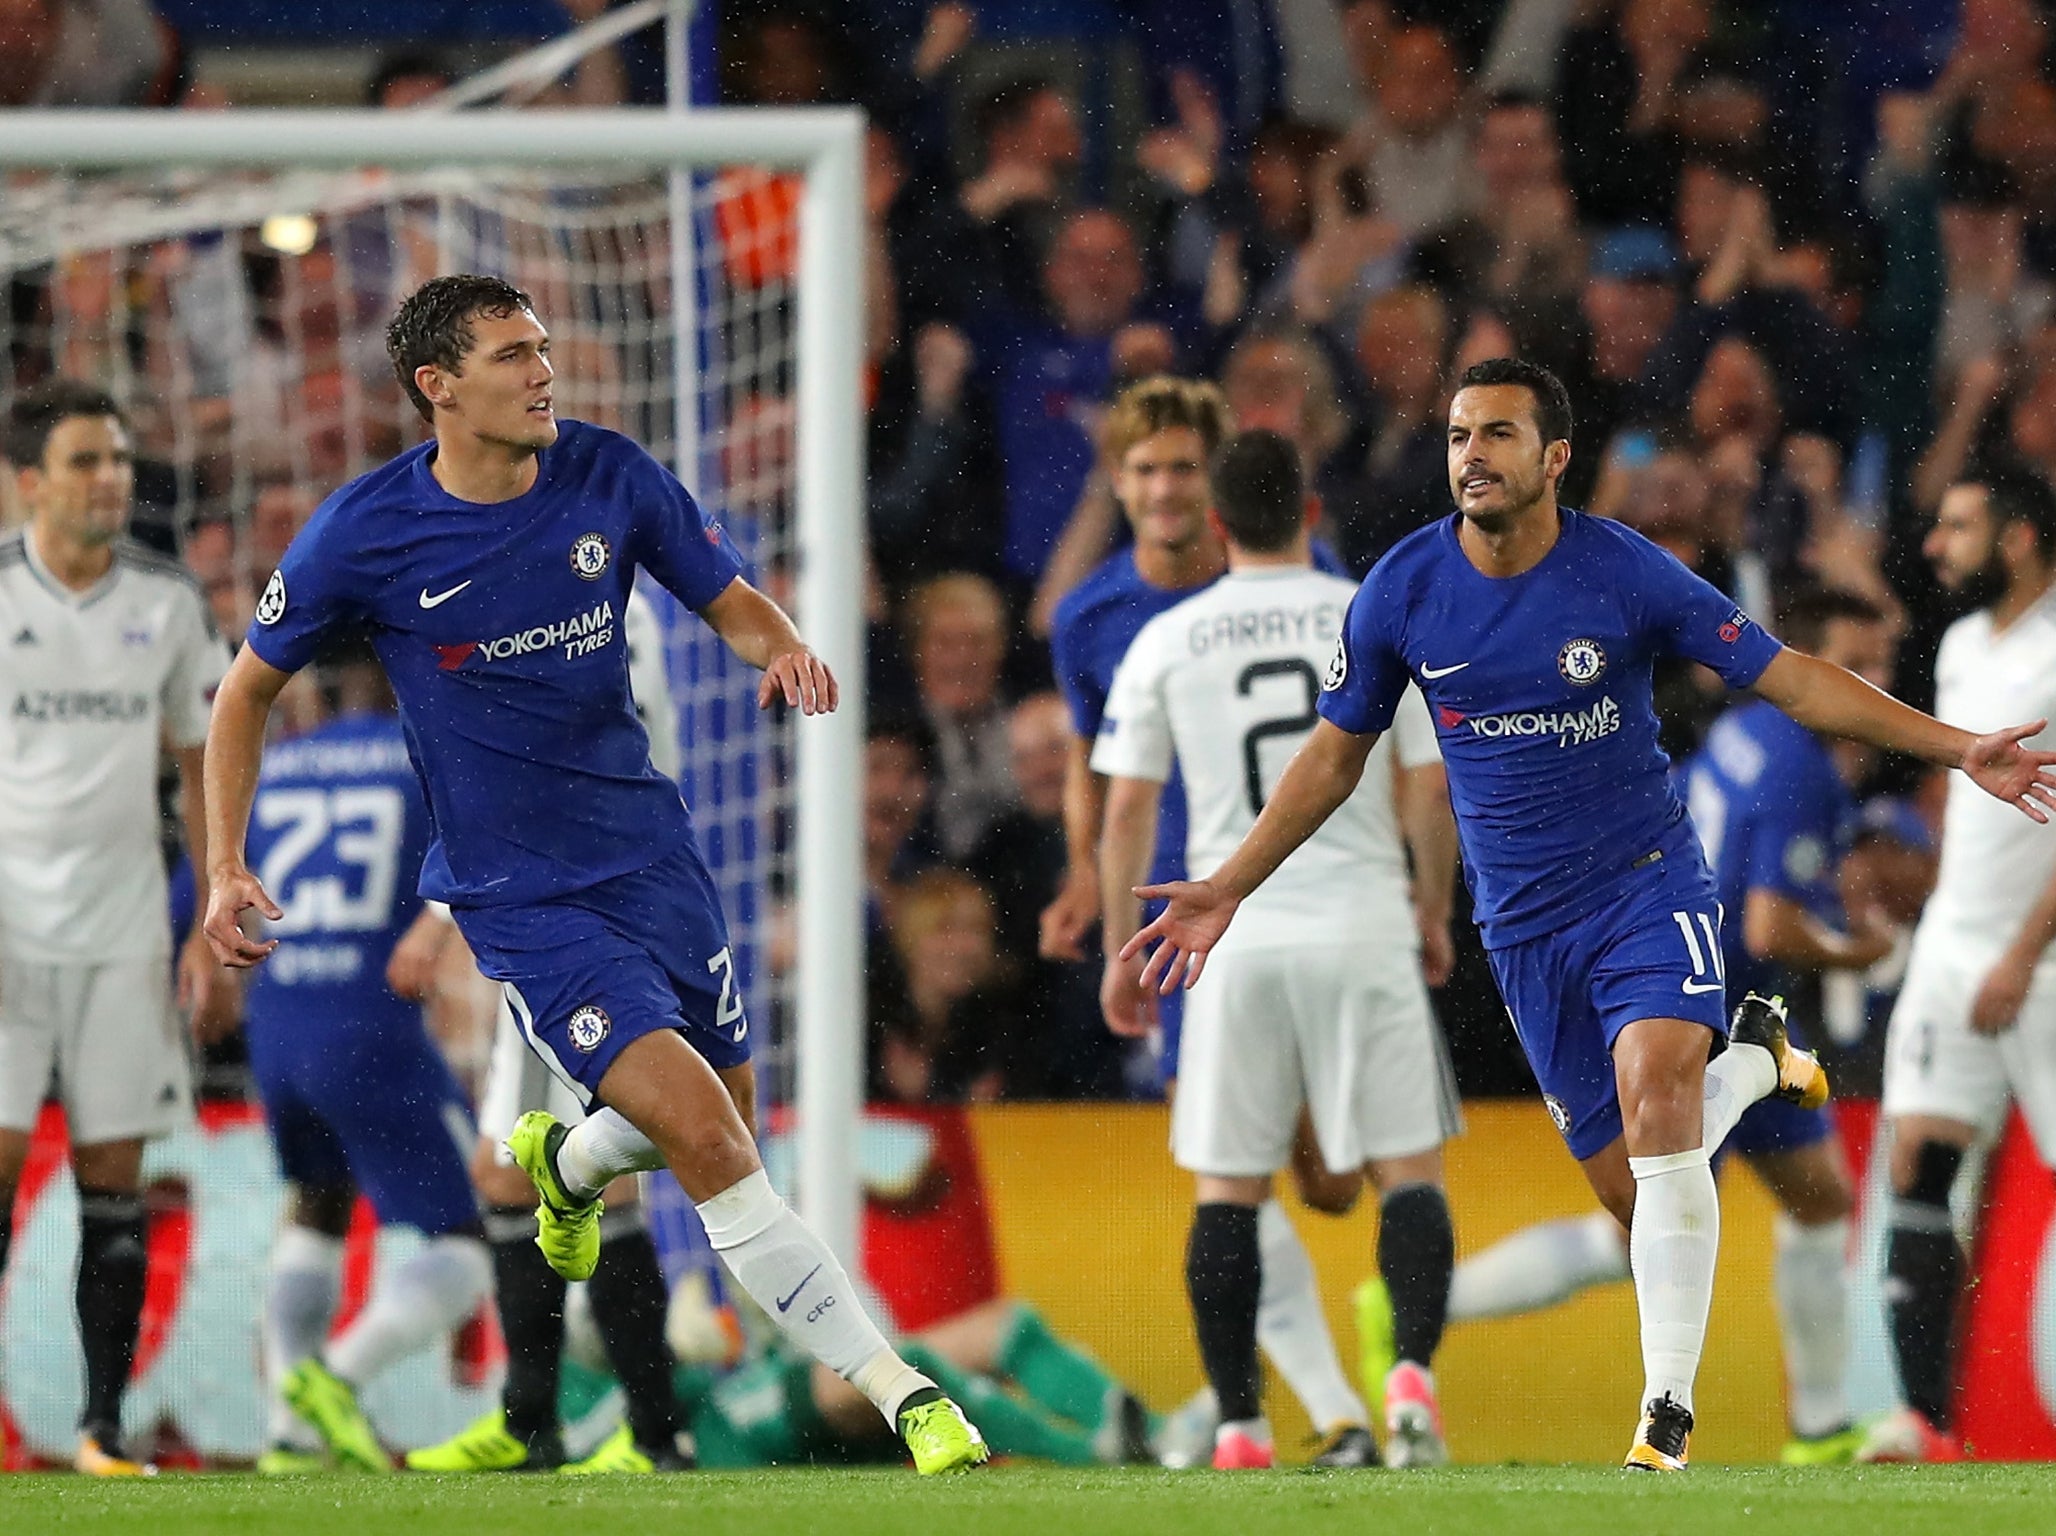 Chelsea have rediscovered the mark of champions after a shaky start to the season